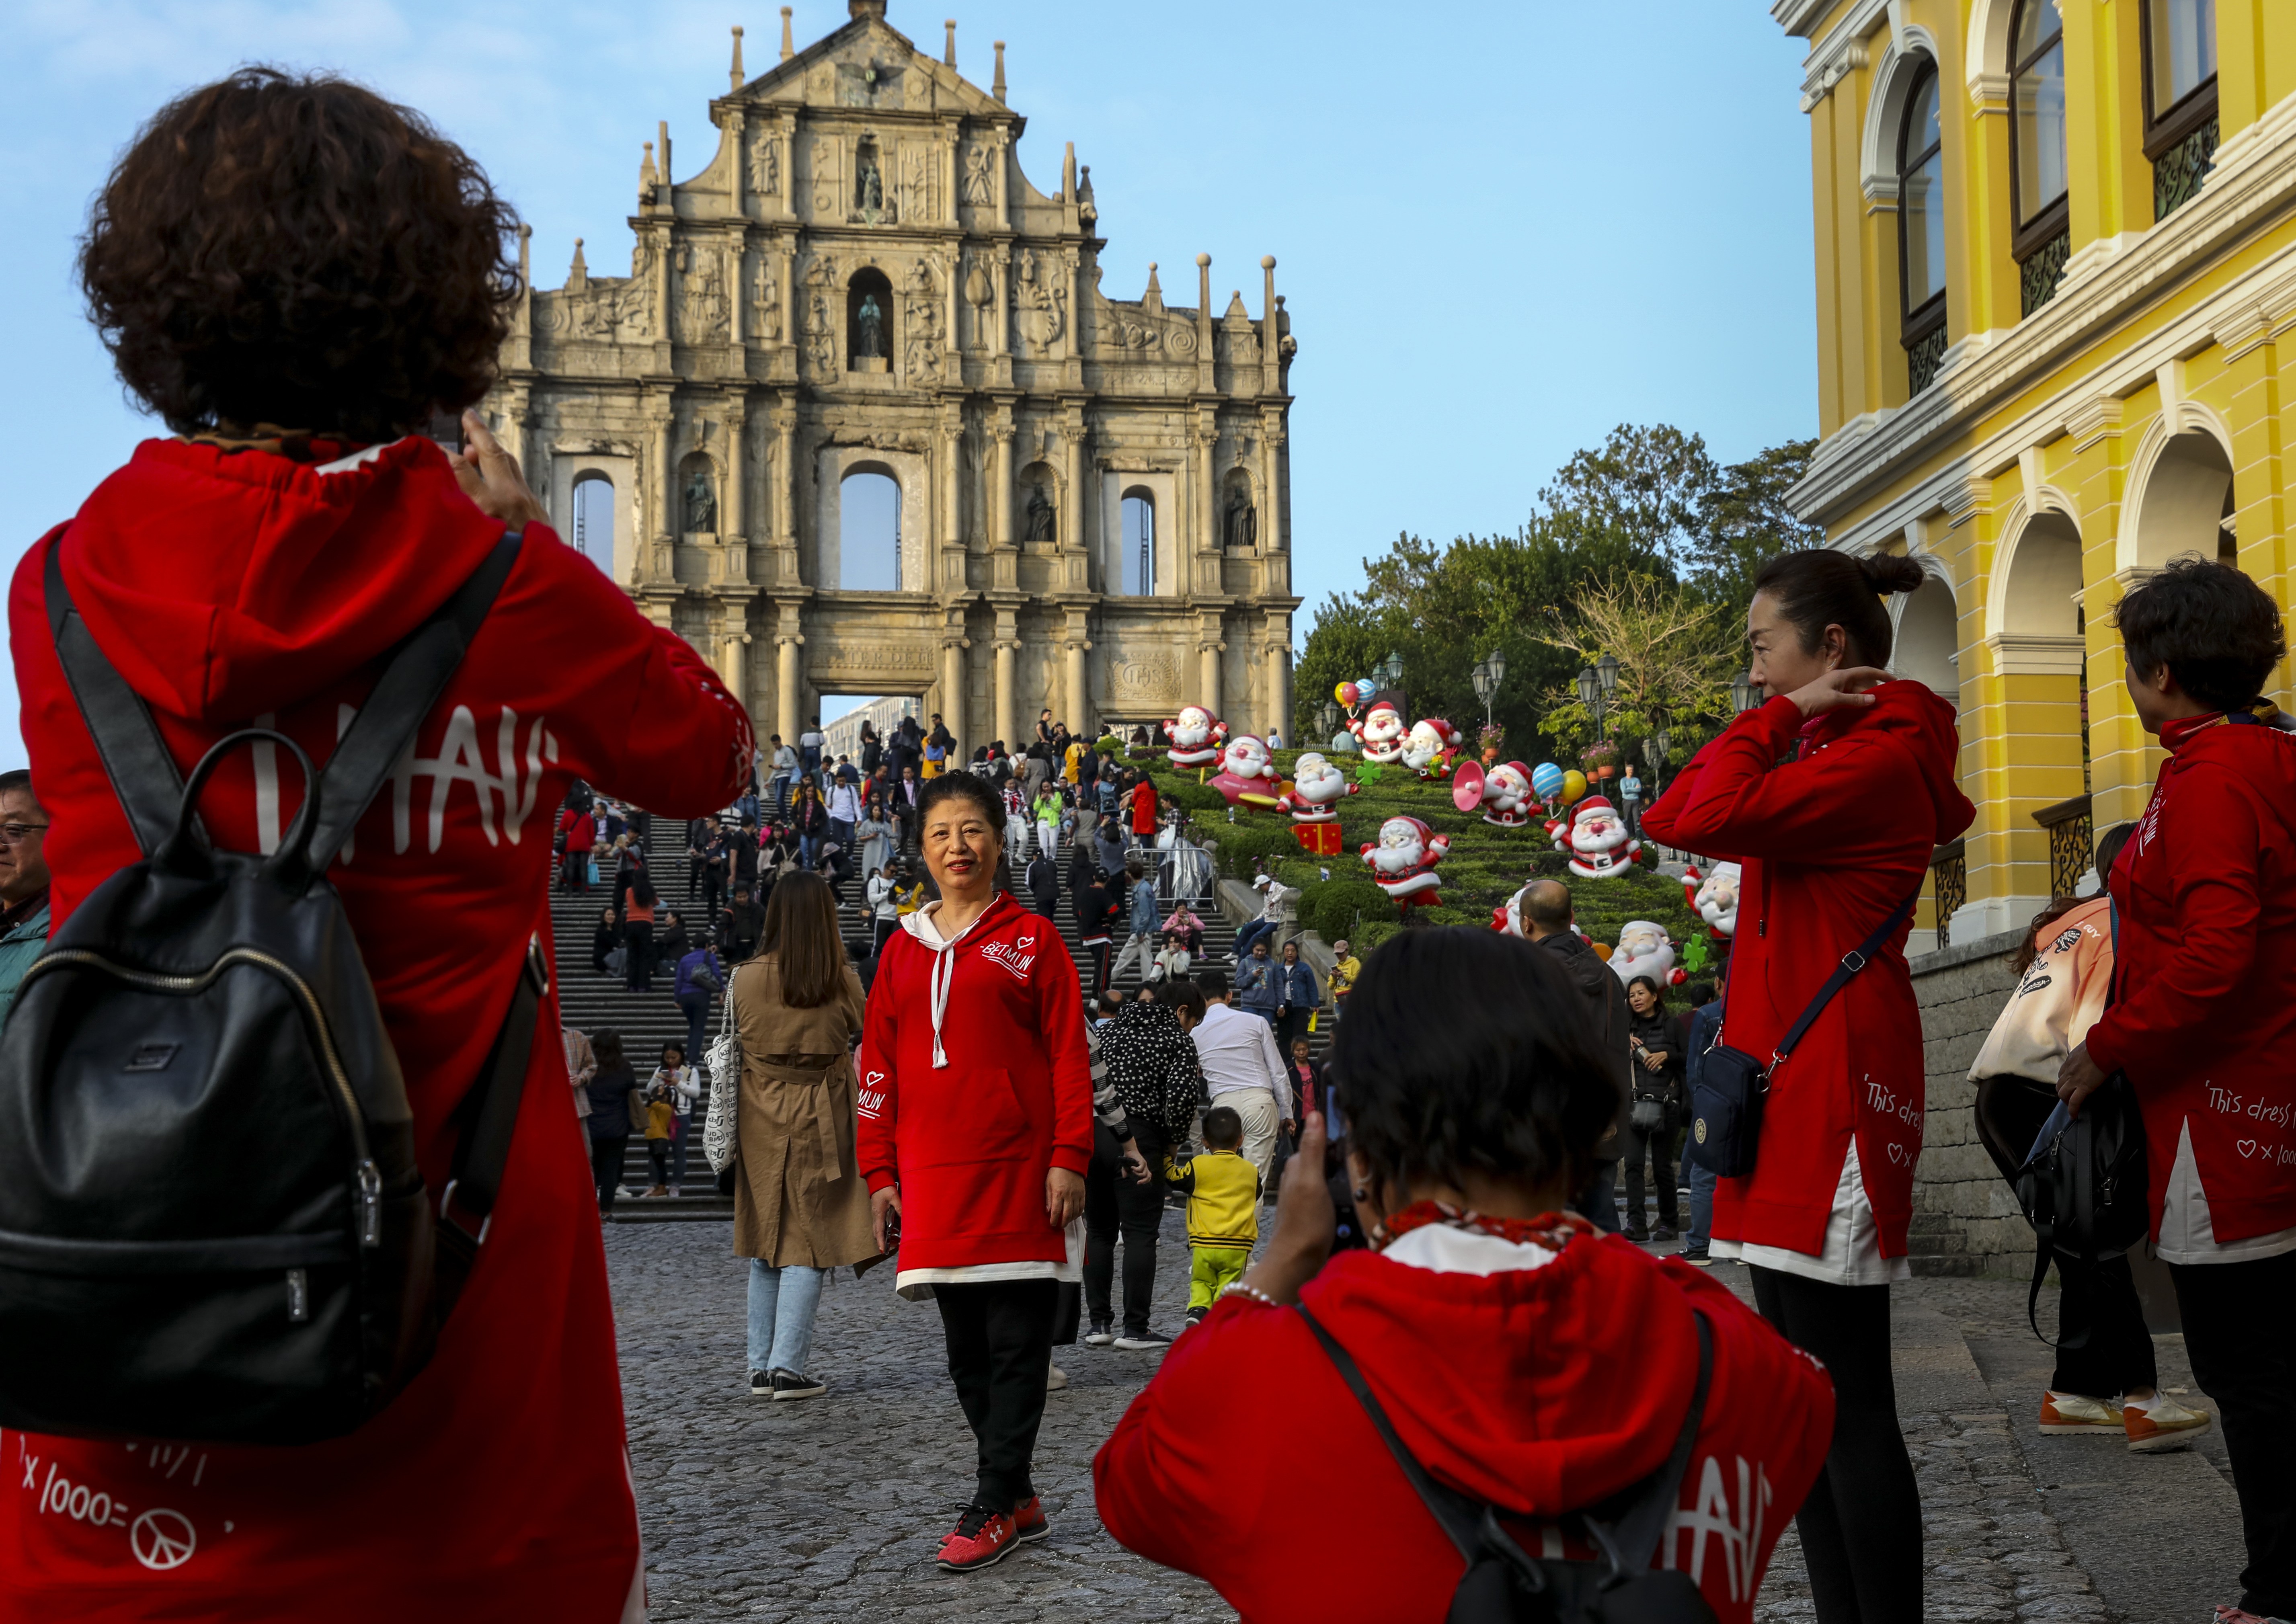 Tourists take photos at the Ruins of St Paul's in Macau on December 13. In addition to religion and culture, Portugal brought to its colony a continental European civil law system. Photo: Nora Tam